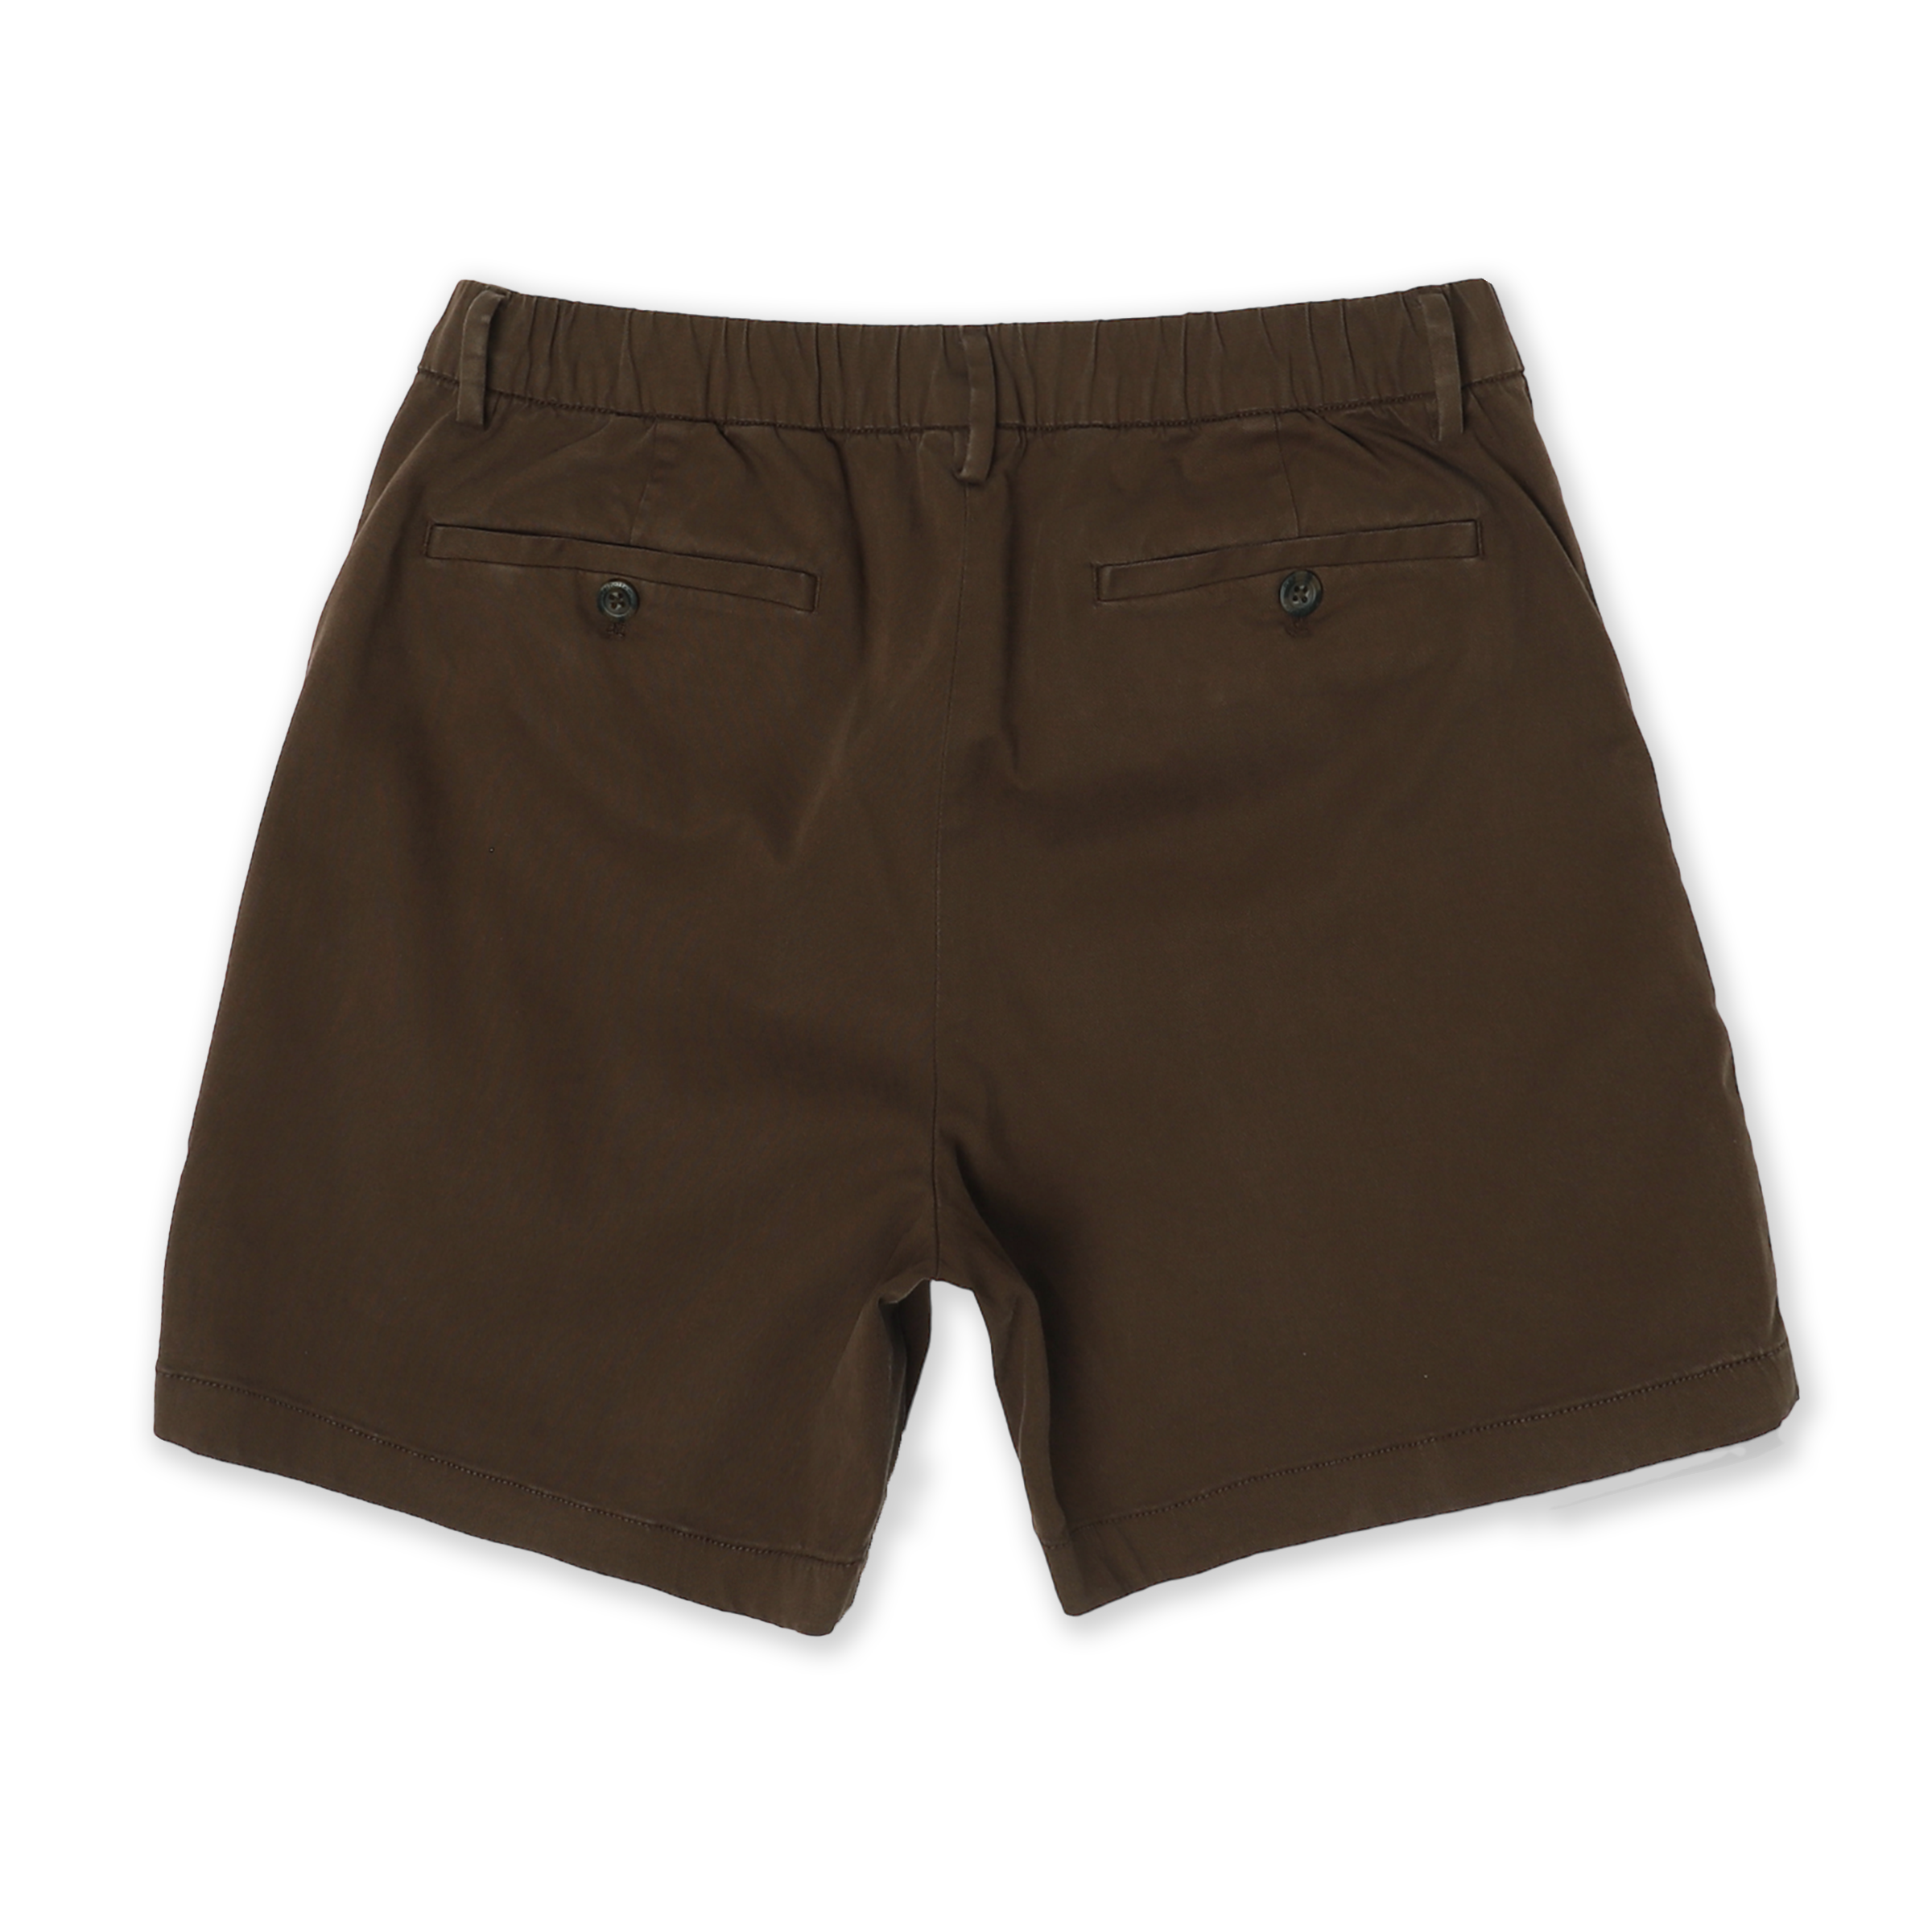 Stretch Chino Short 5.5" in Cocoa back with elastic waistband, belt loops, and two buttoned welt pockets